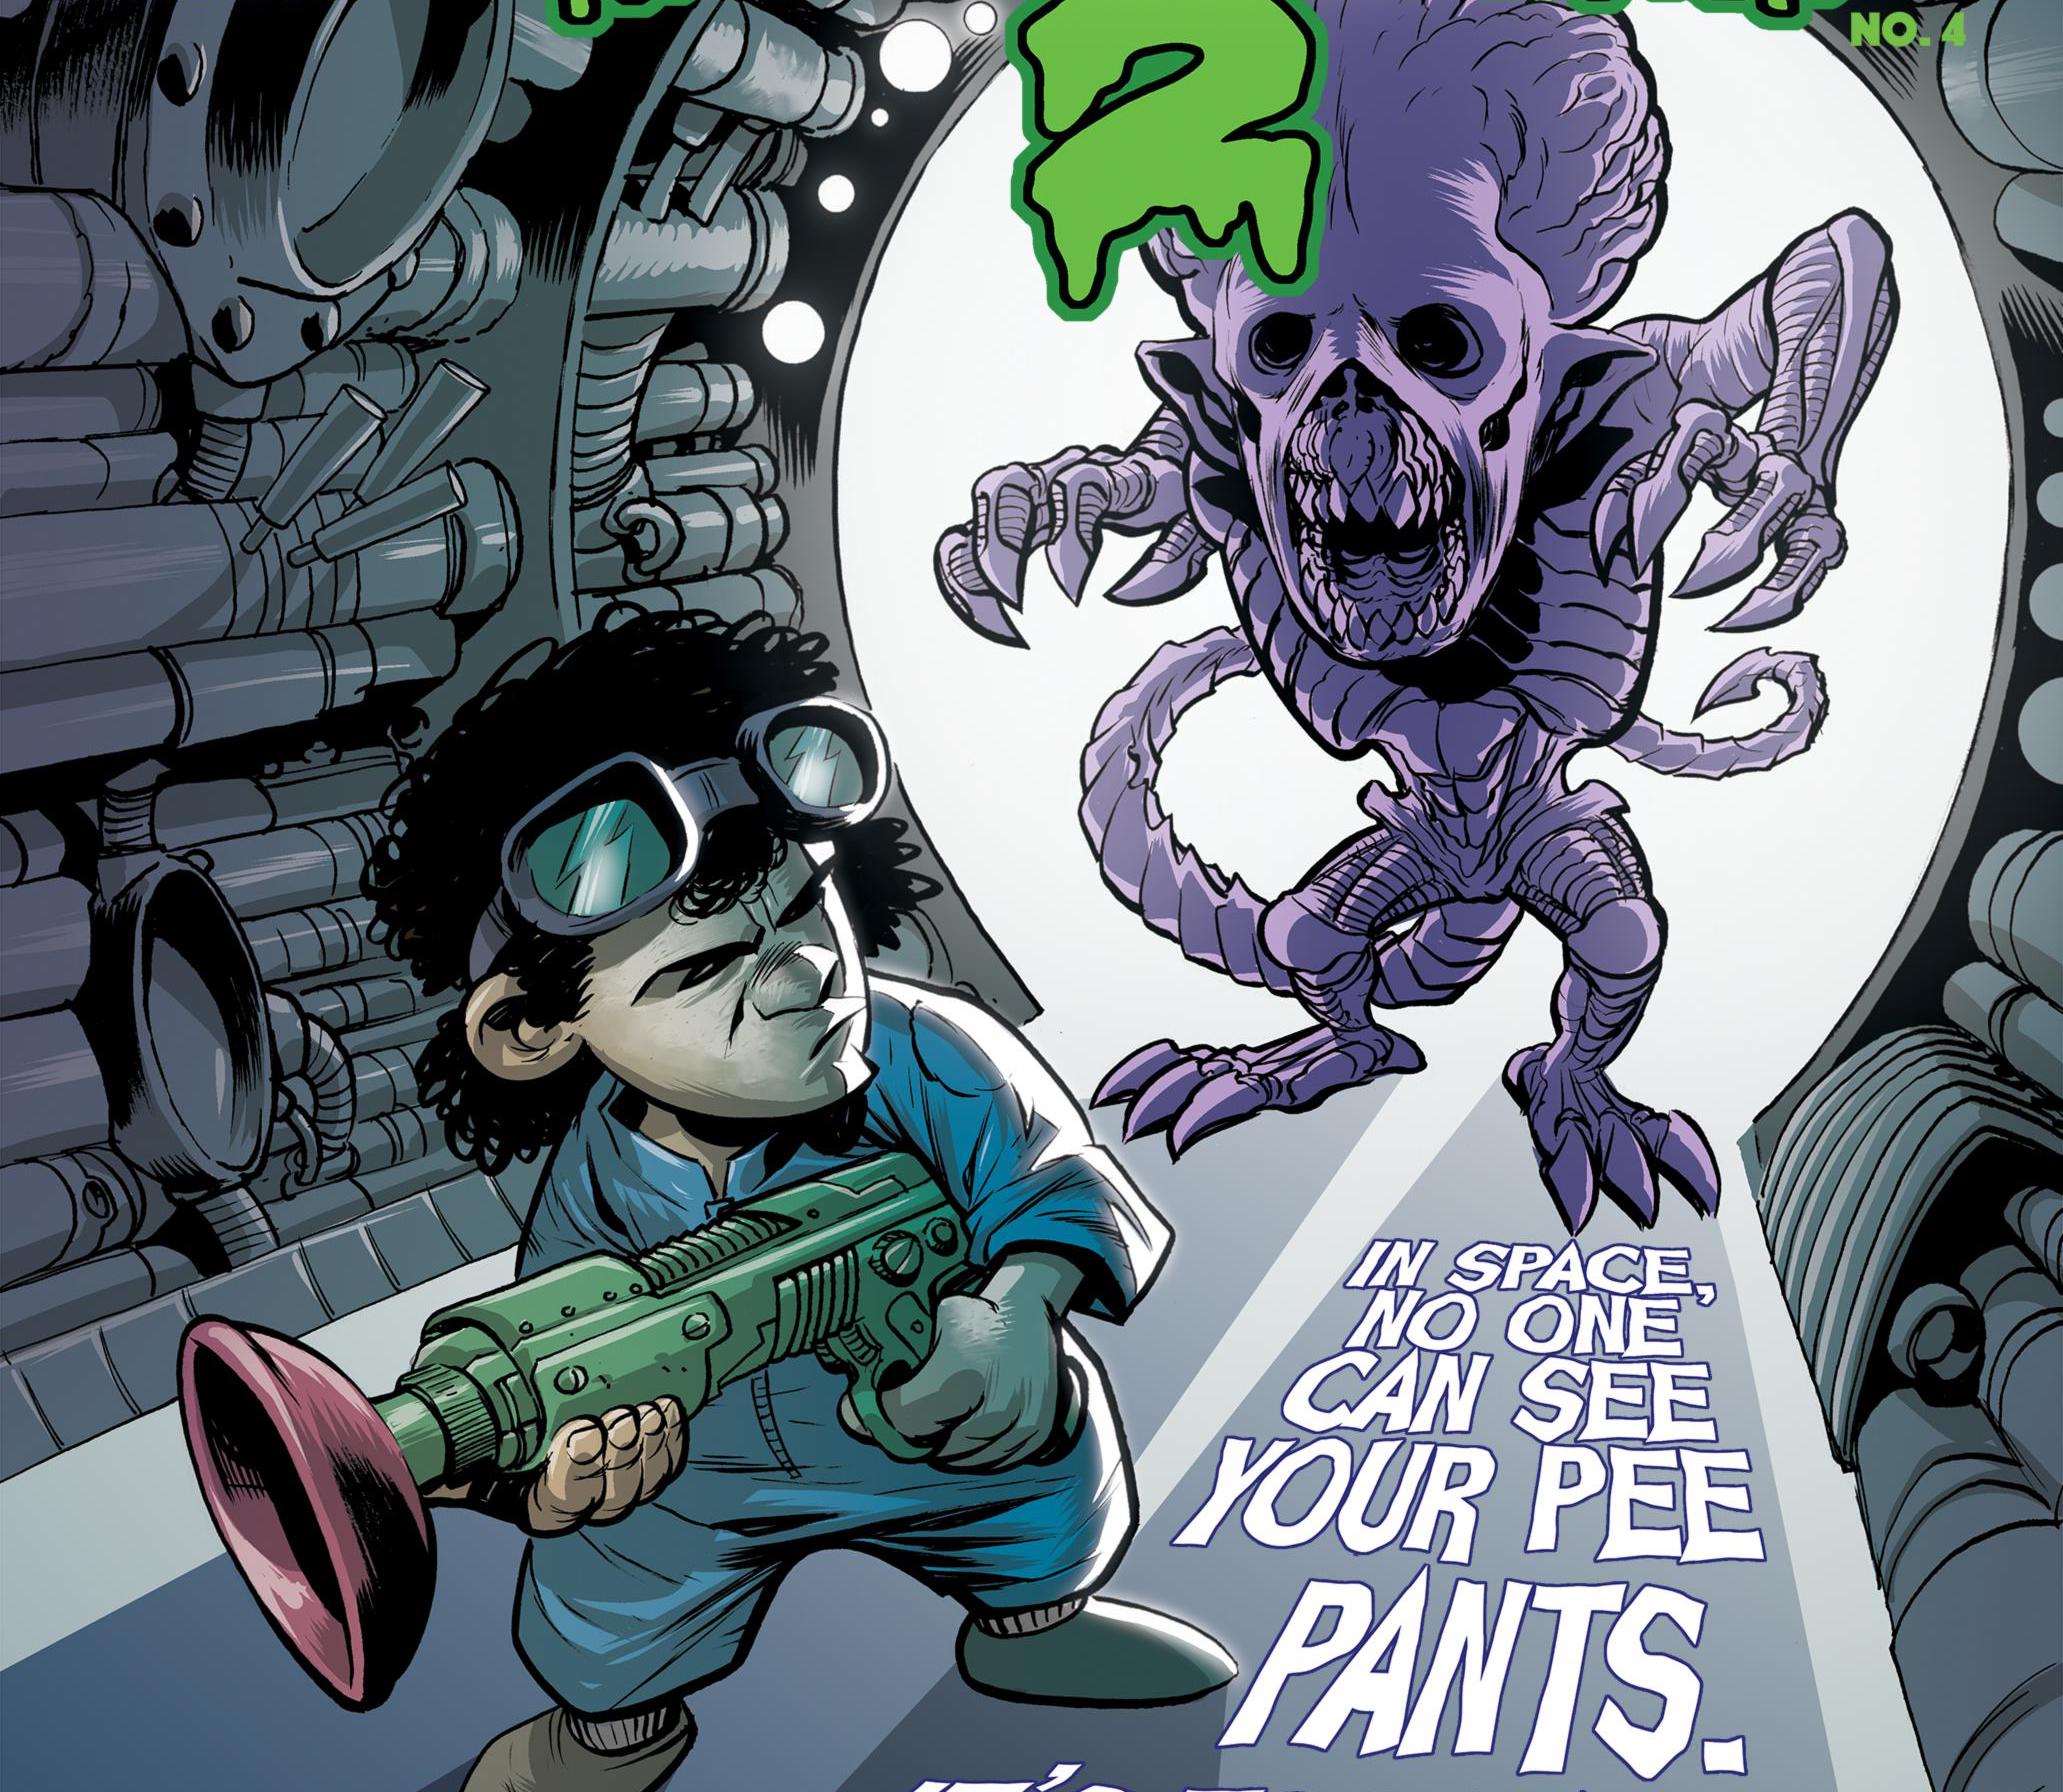 [EXCLUSIVE] Albatross Preview: Spook House 2 #4